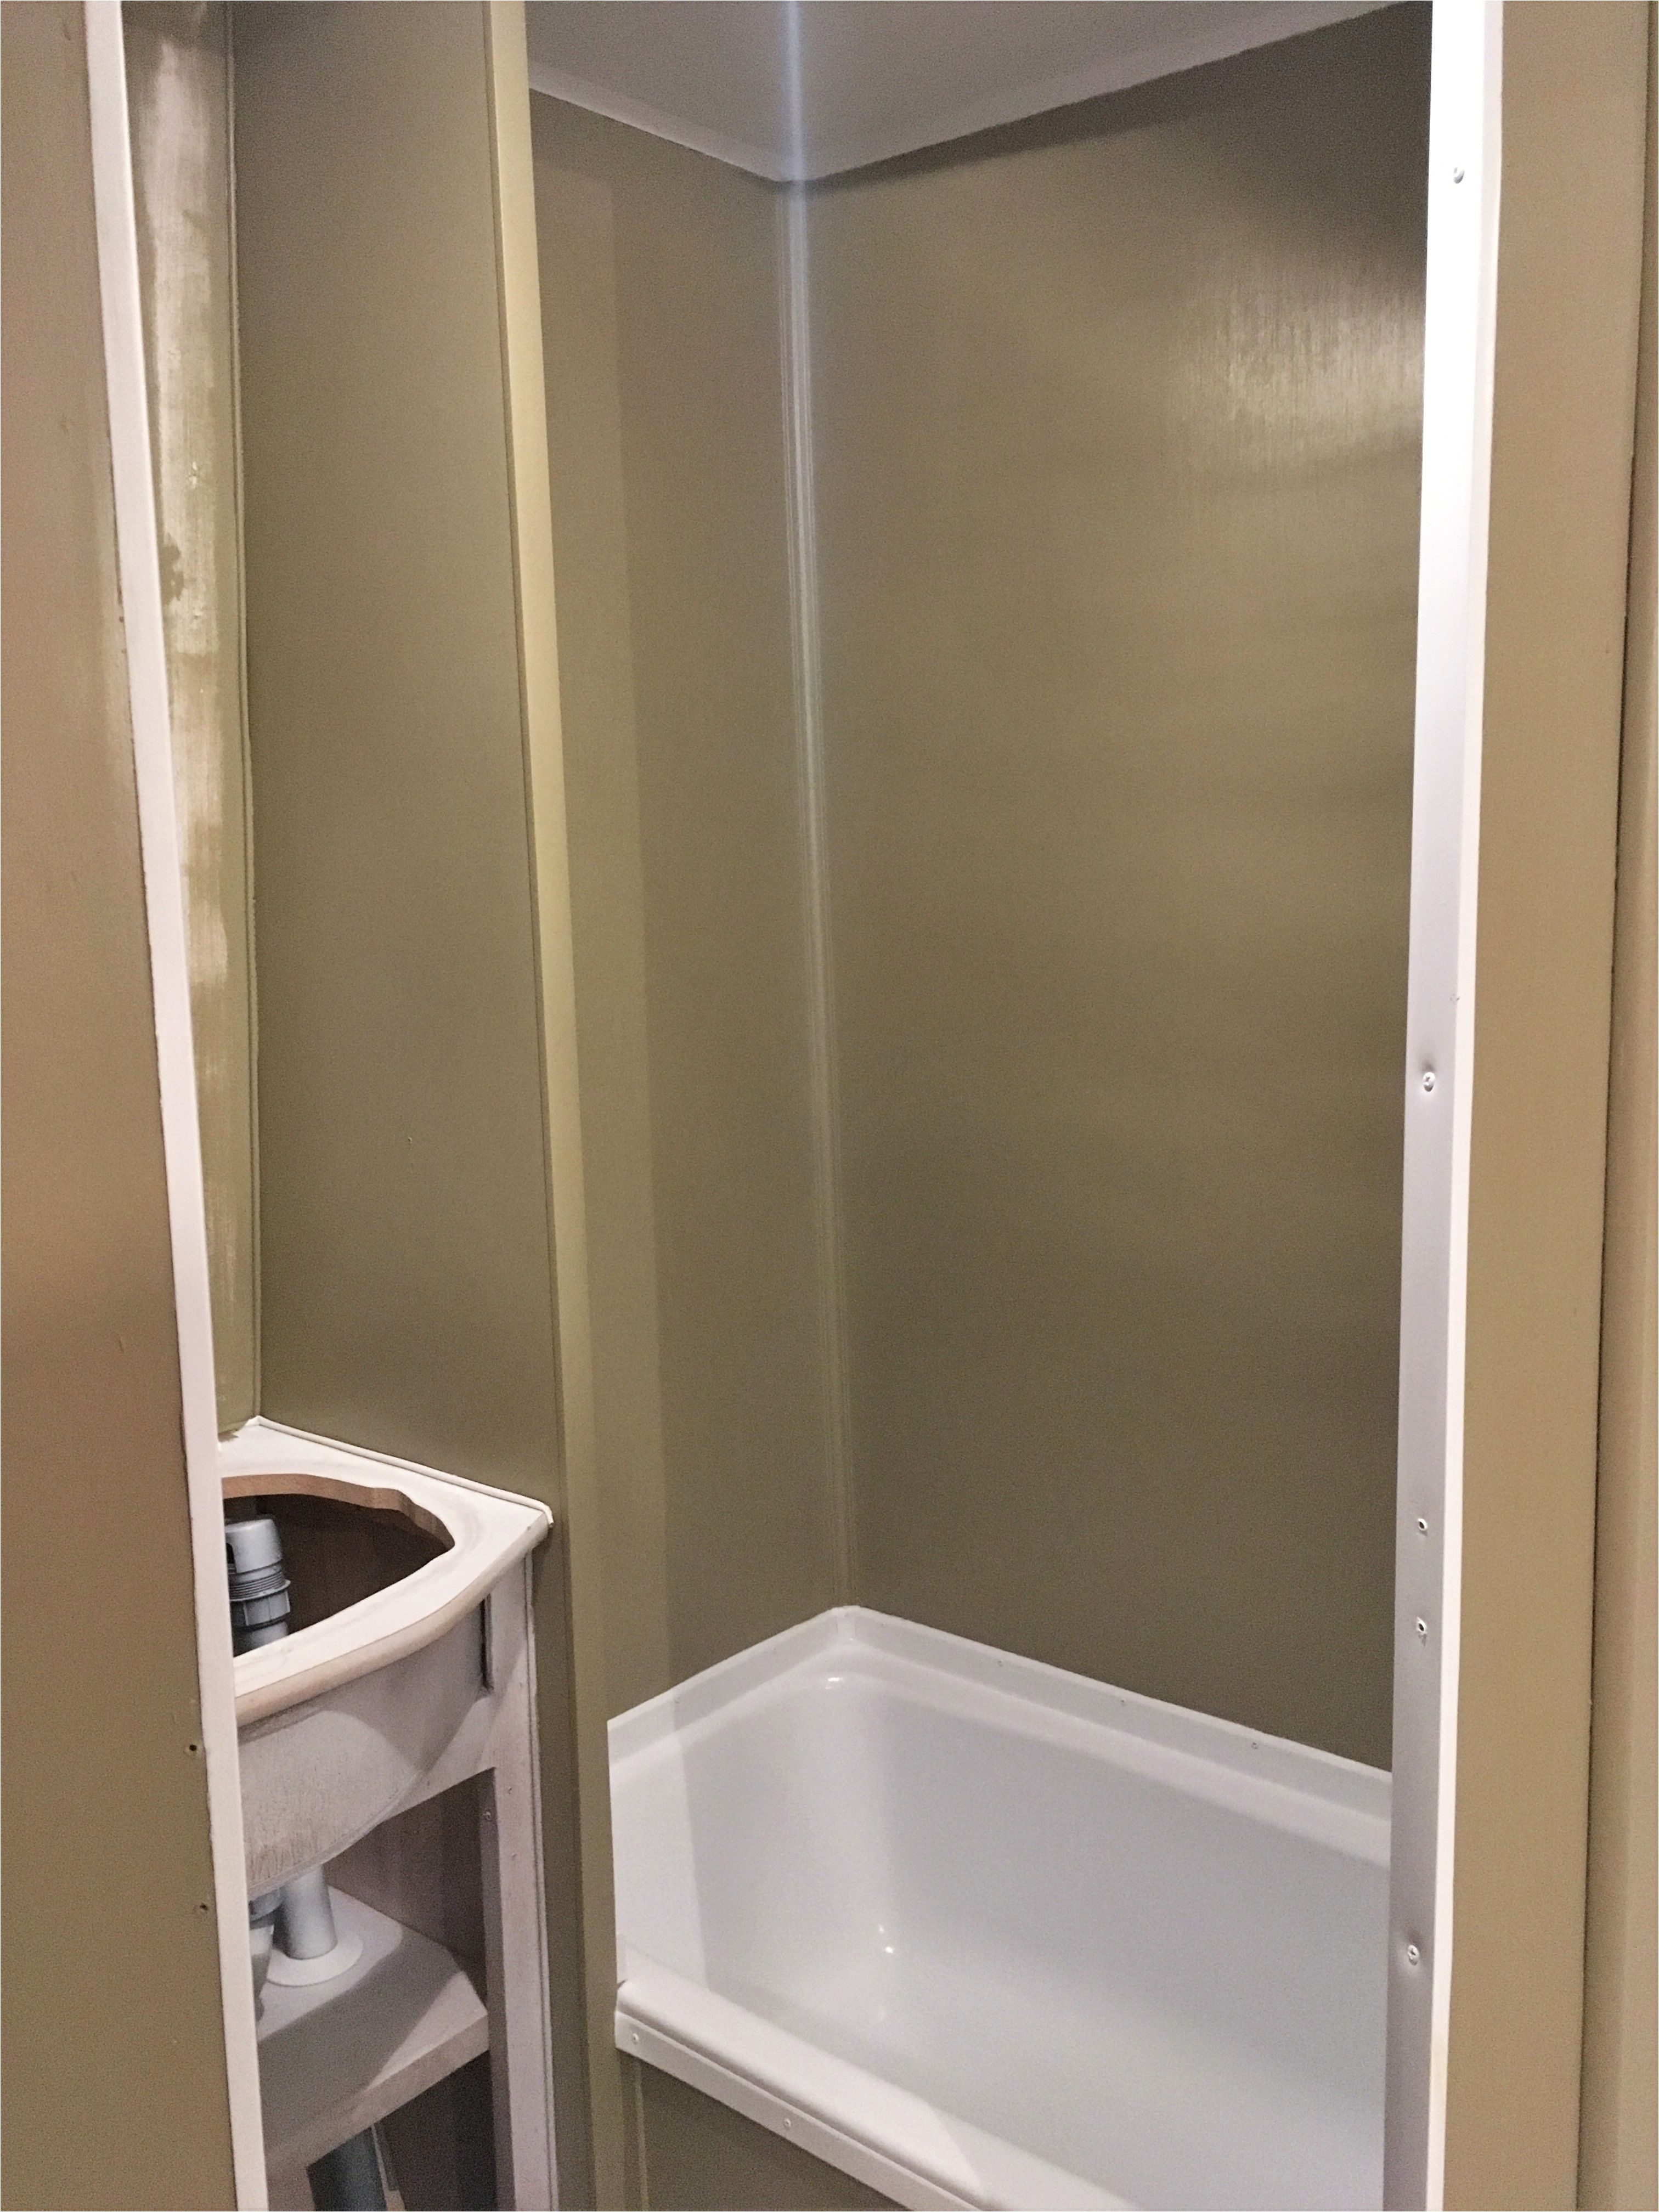 painting wall color in tub area also